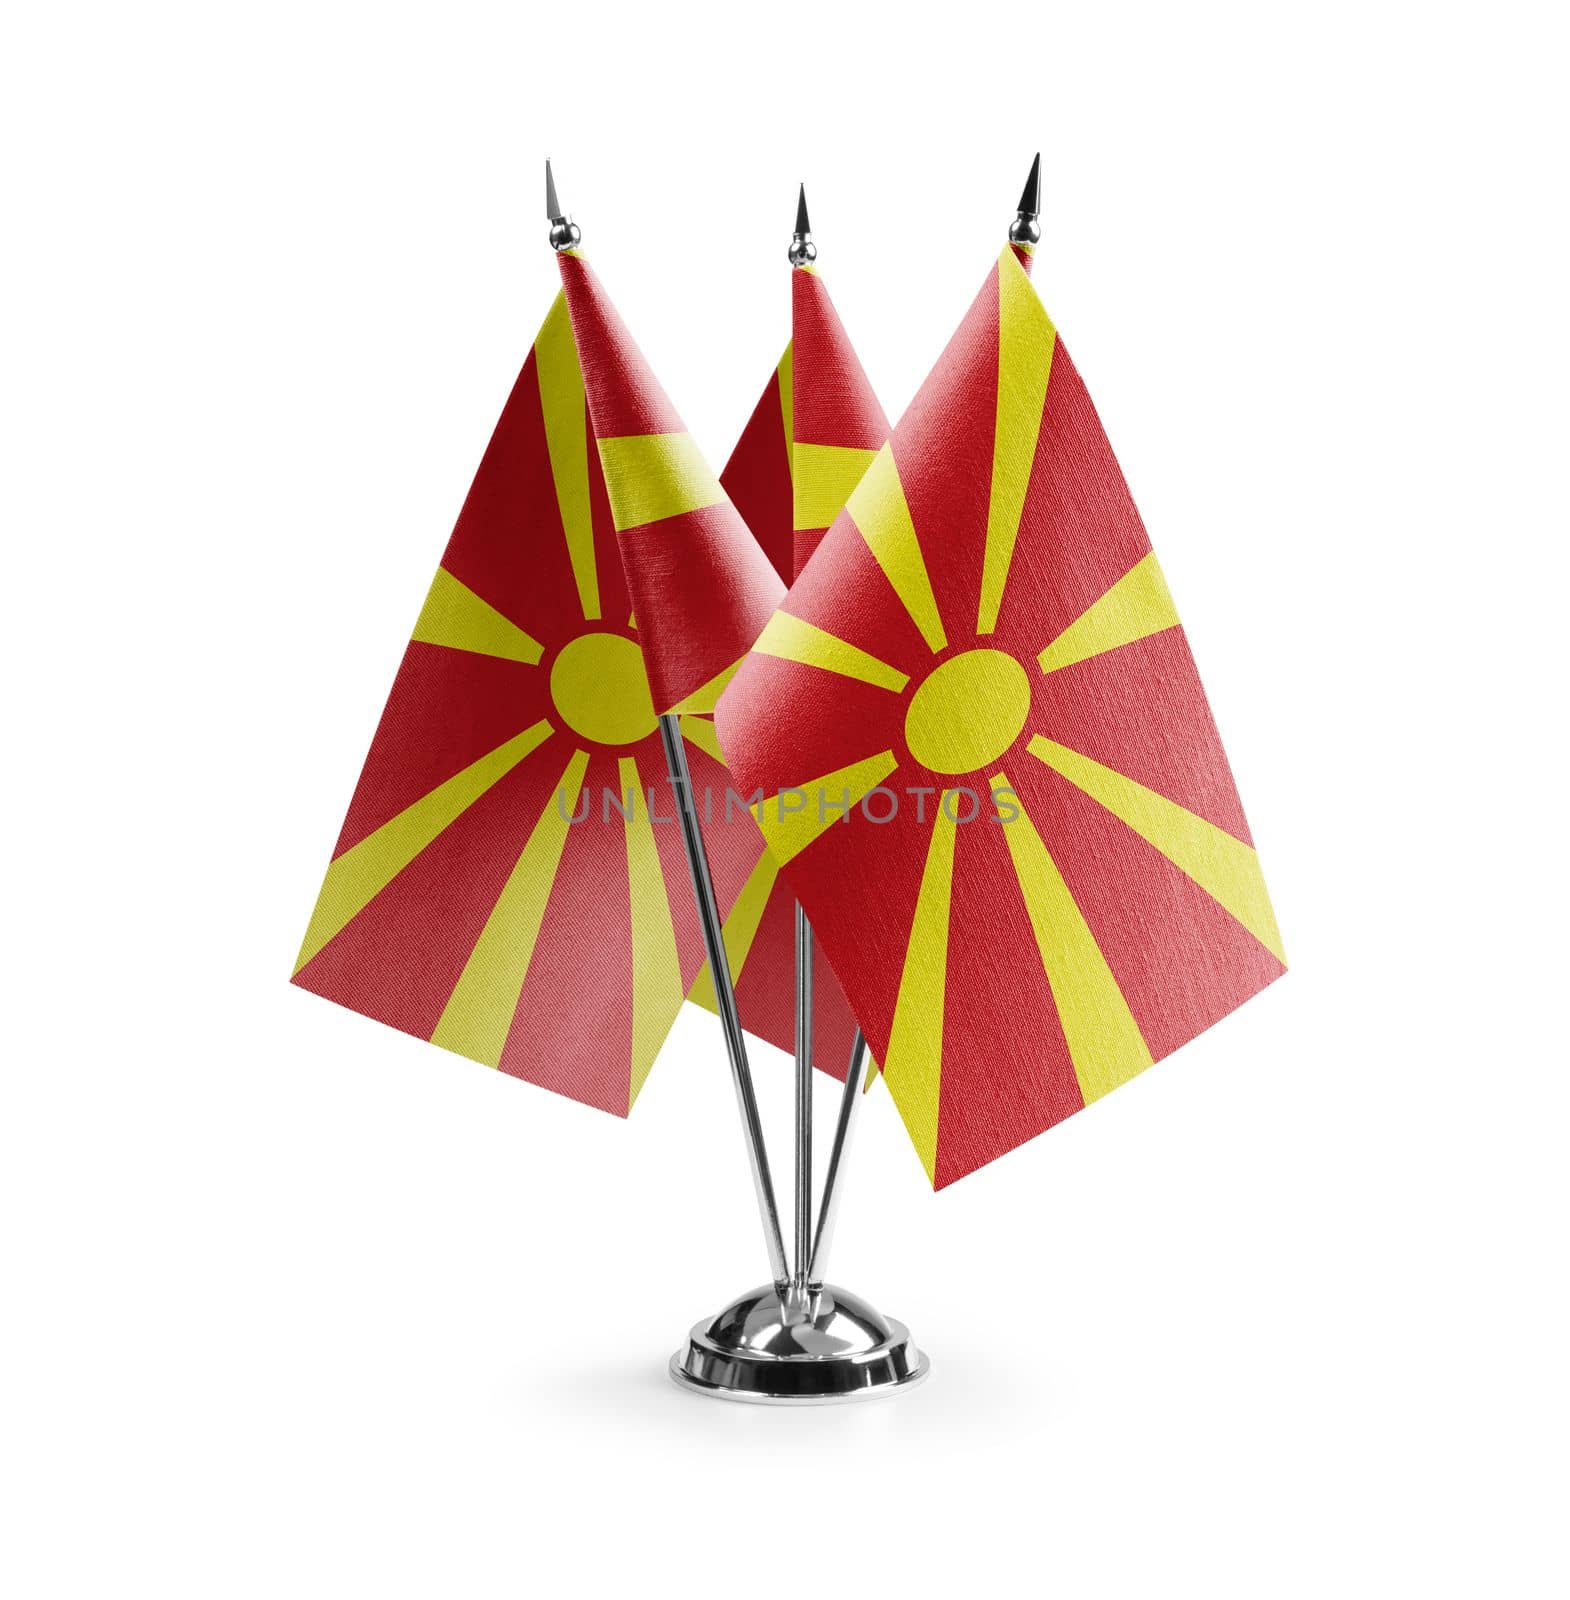 Small national flags of the Macedonia on a white background by butenkow